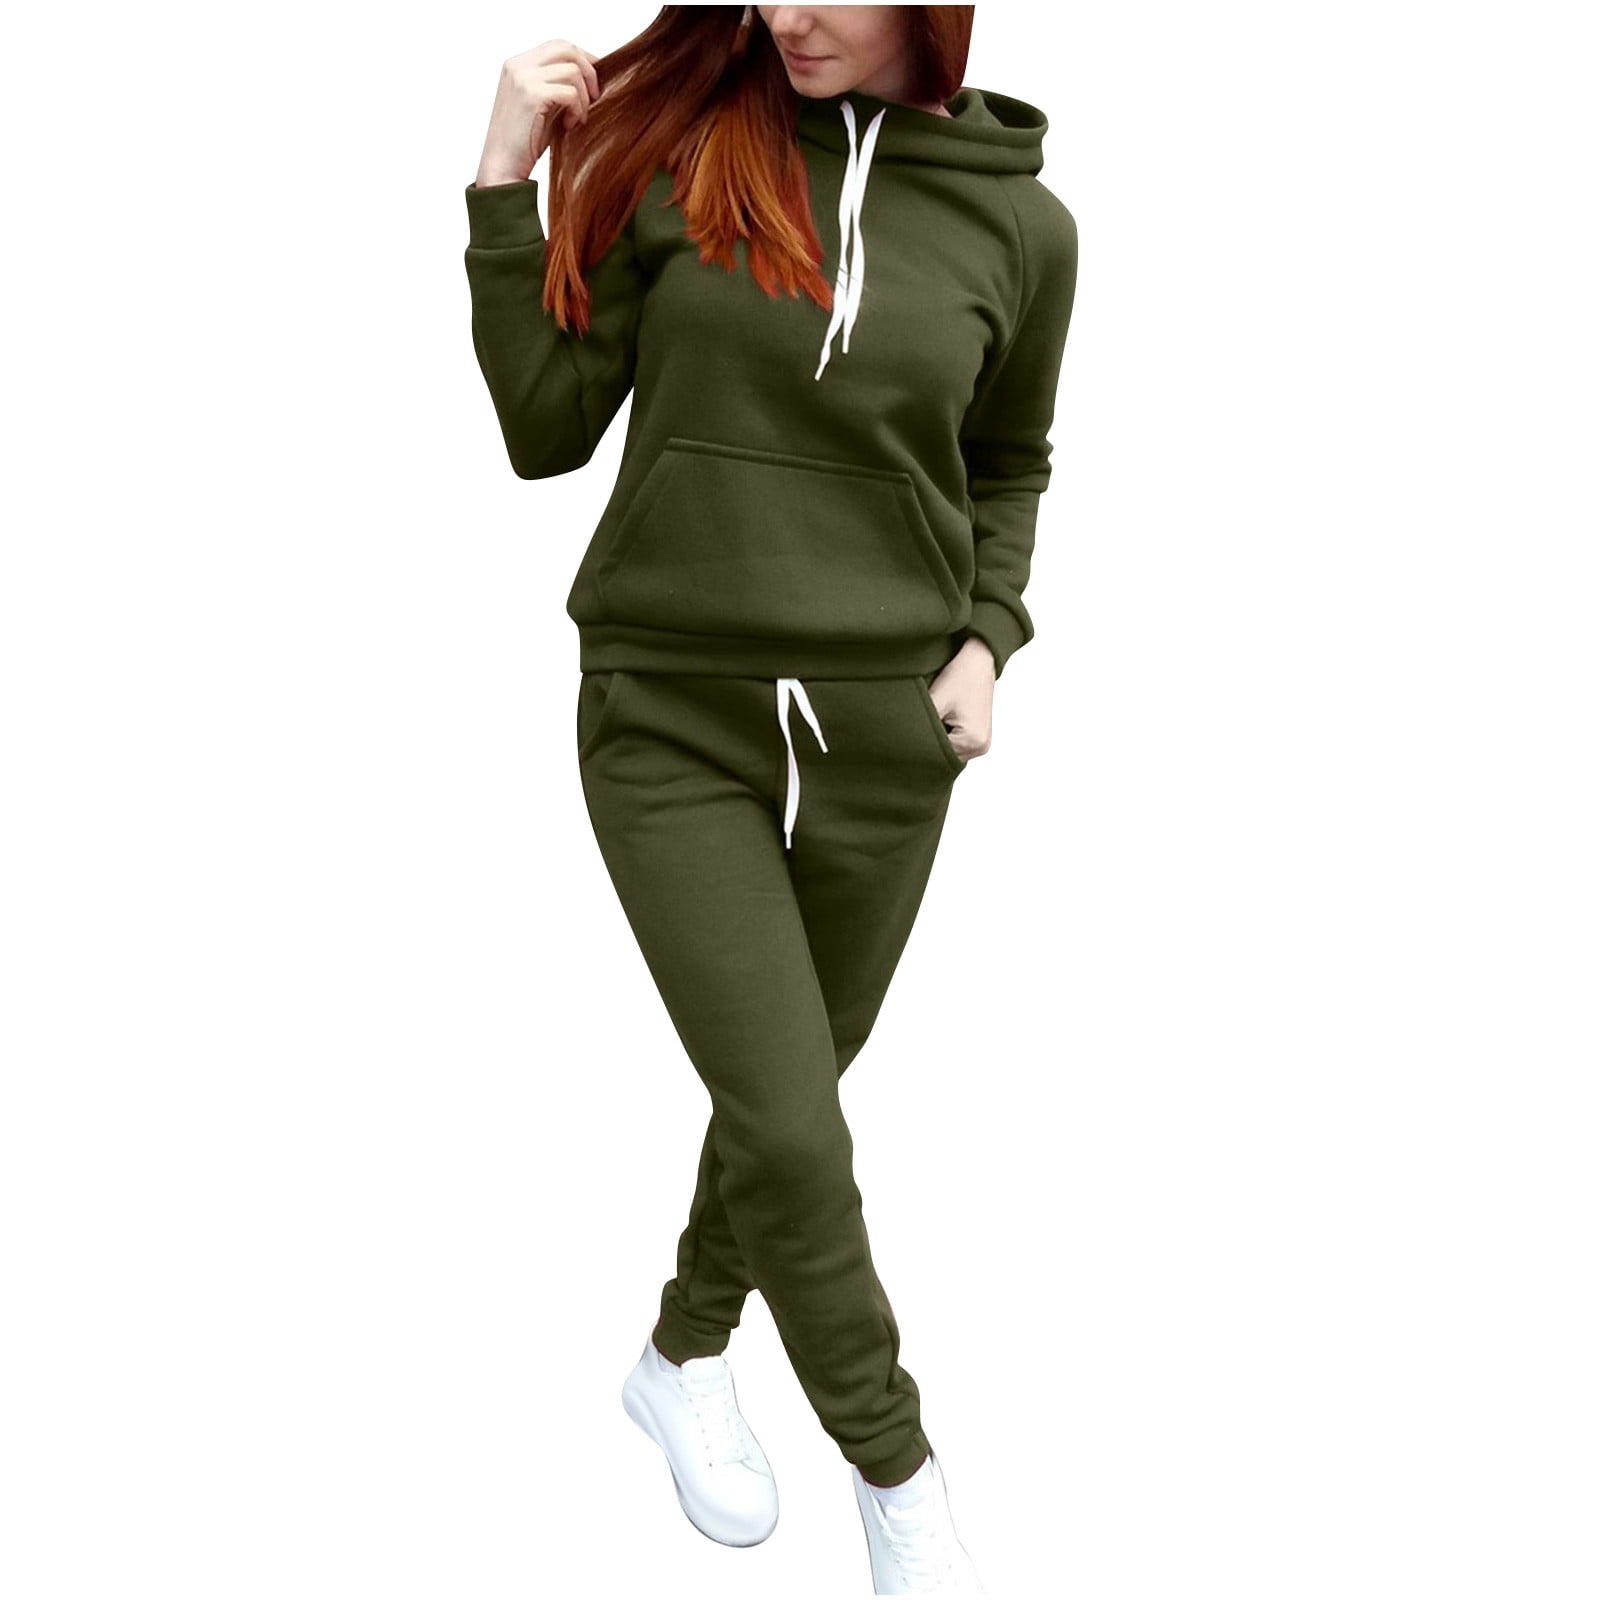 FAIWAD Women 2 Piece Outfits Casual Sweatsuit Hooded Sweatshirt Hoodie with  Sweatpants Sport Outfits Jogger Set (Small, Army Green) 